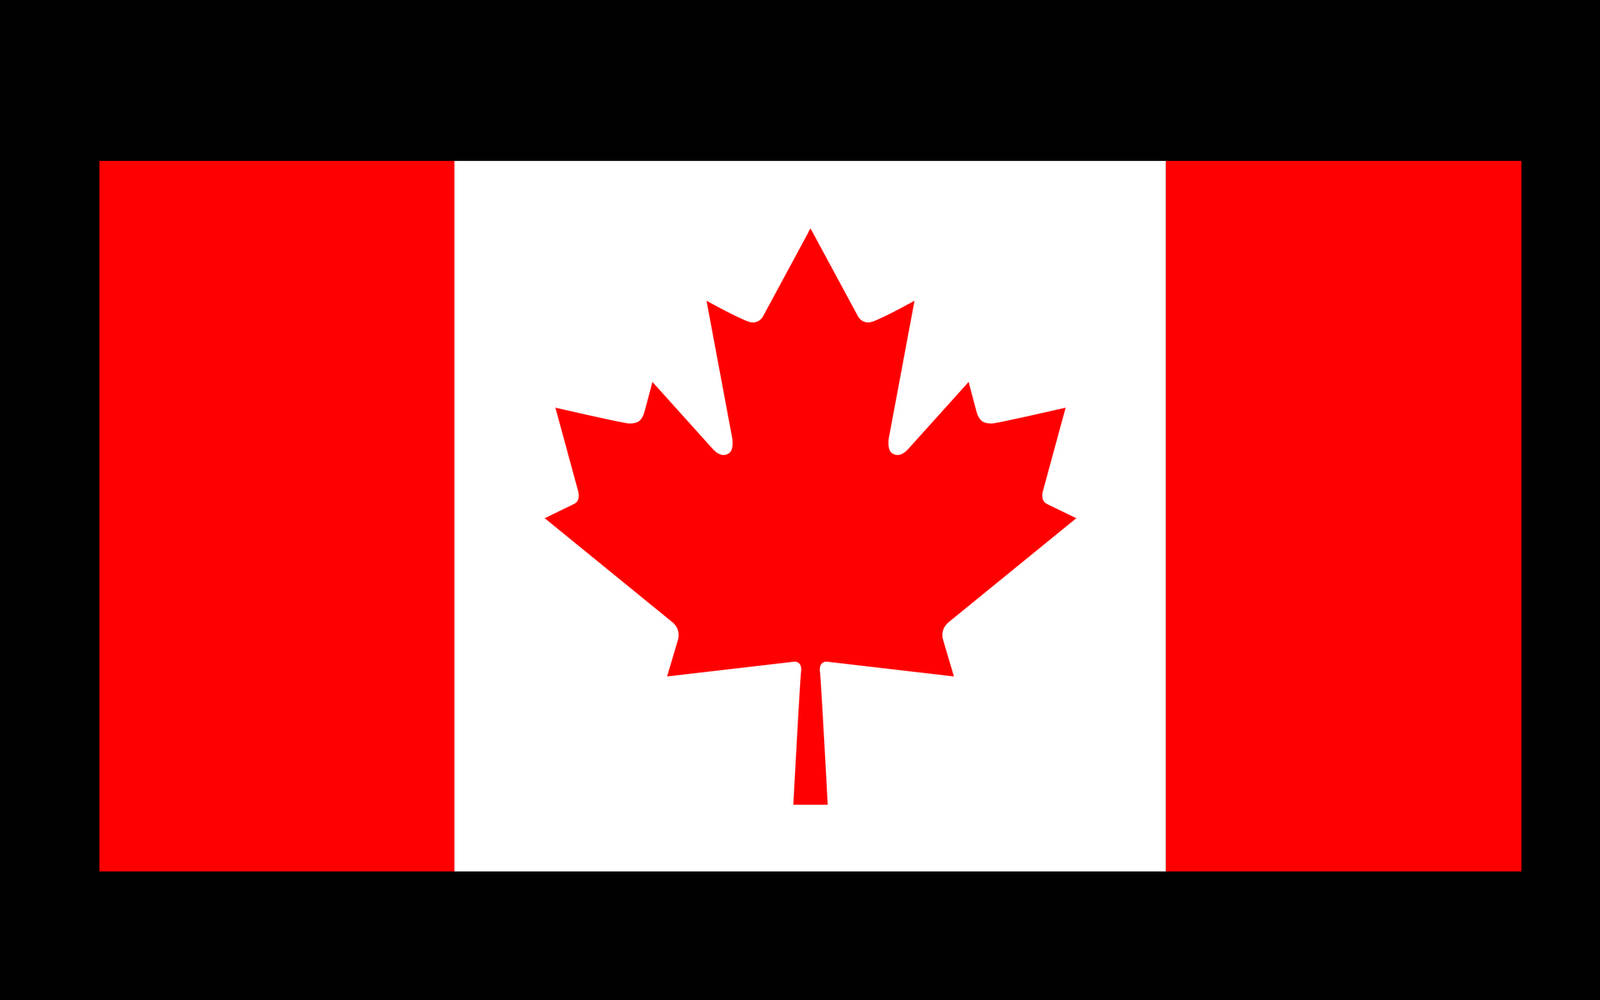 The Canadian Flag in Full Glory Wallpaper